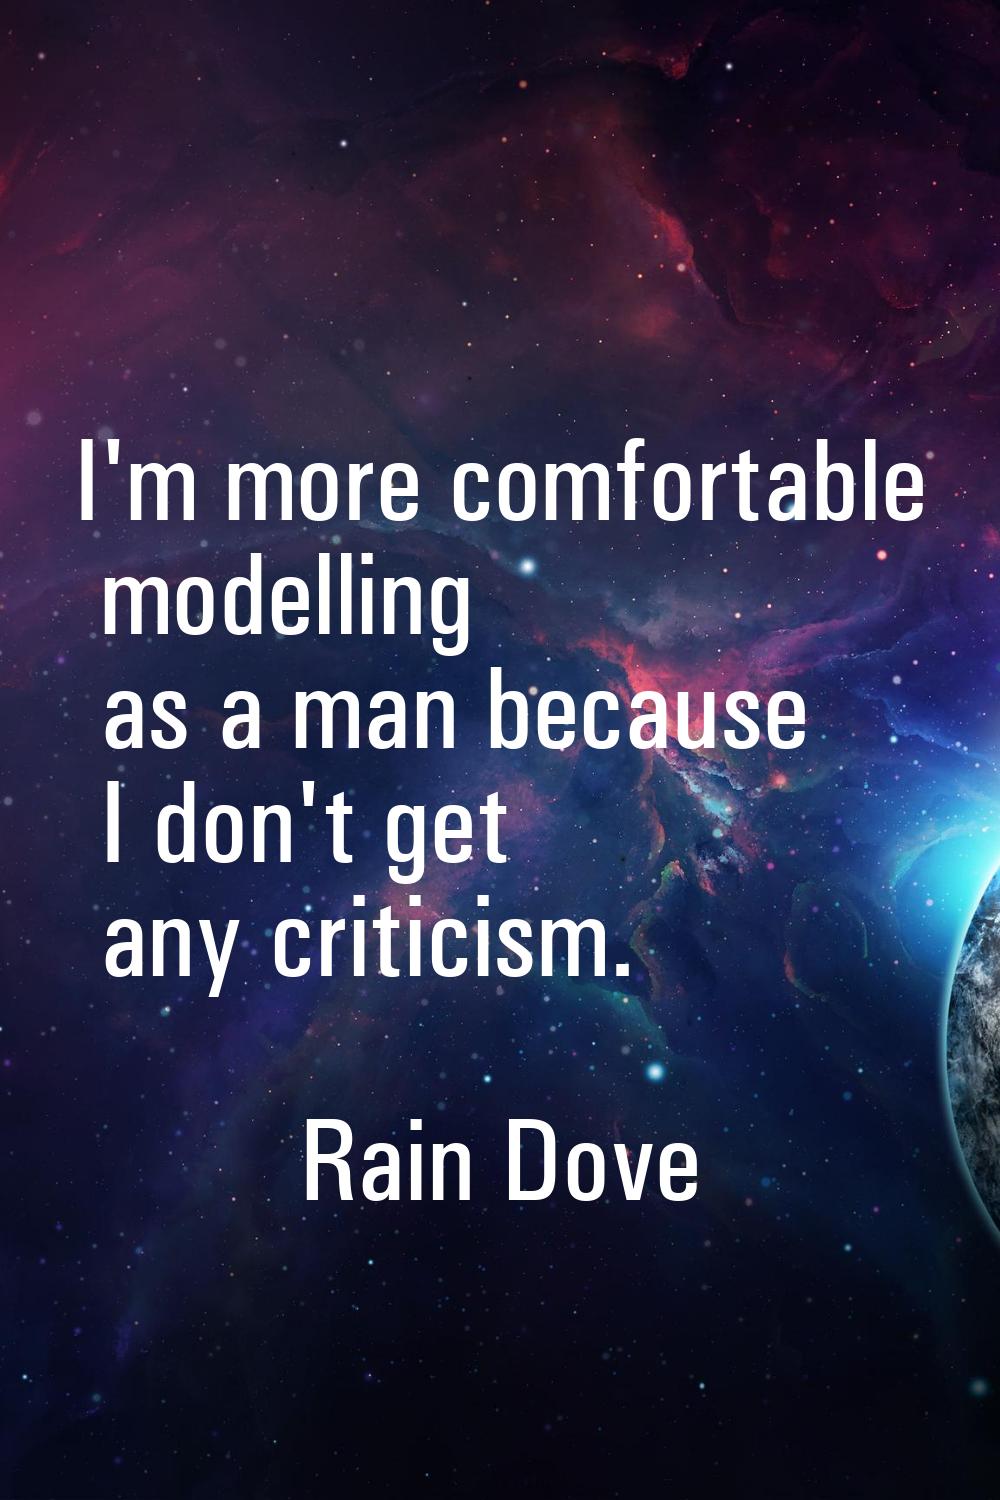 I'm more comfortable modelling as a man because I don't get any criticism.